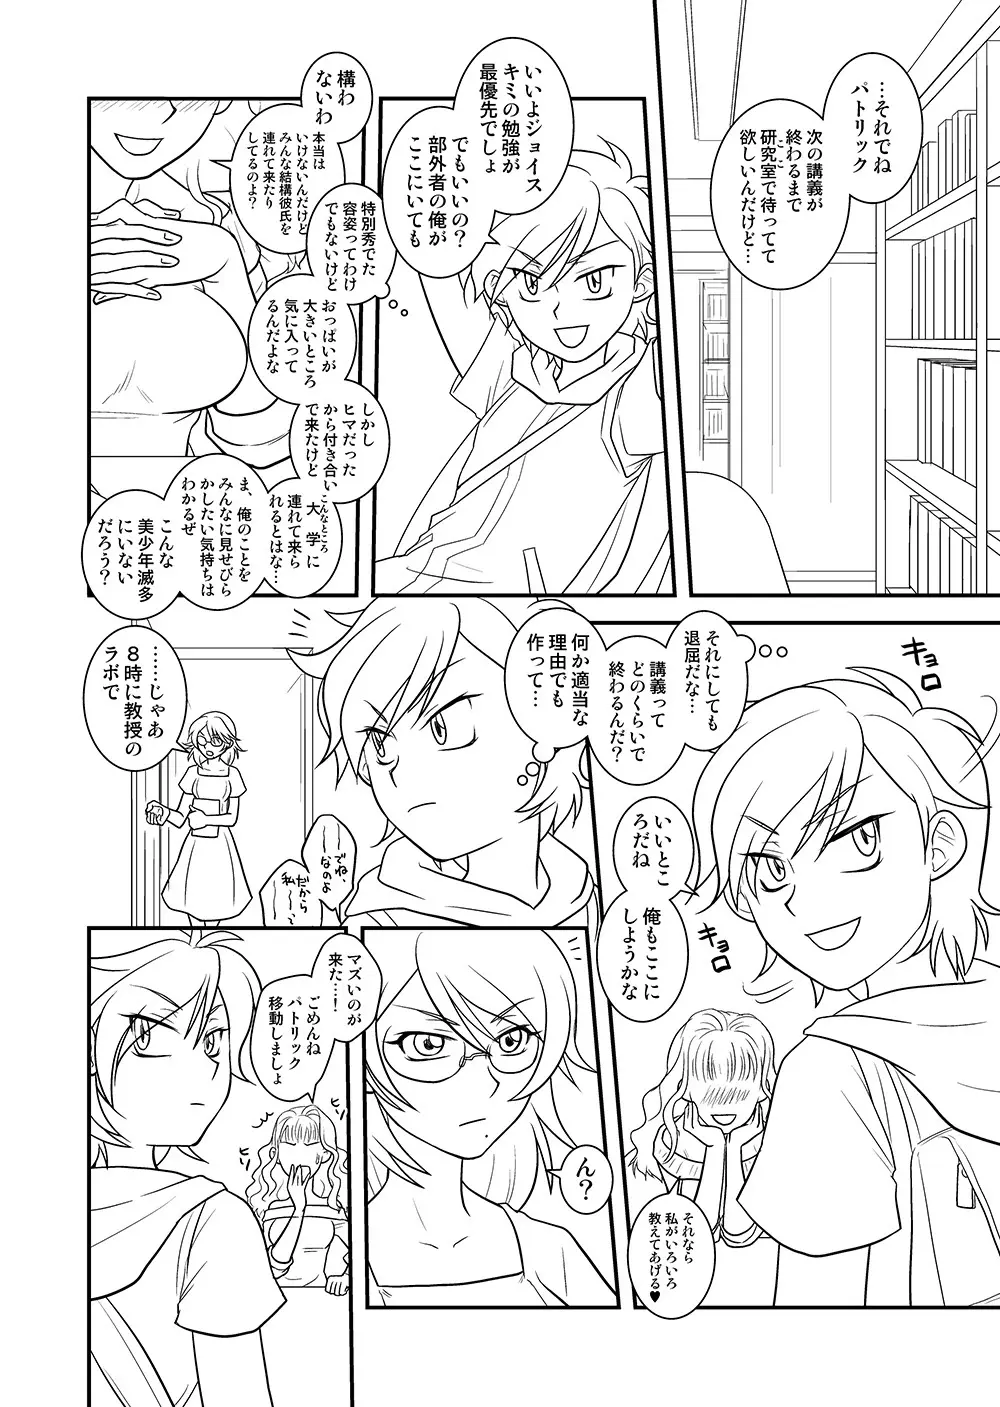 ［WEB再録（？）］たいさとおれ。 - page3